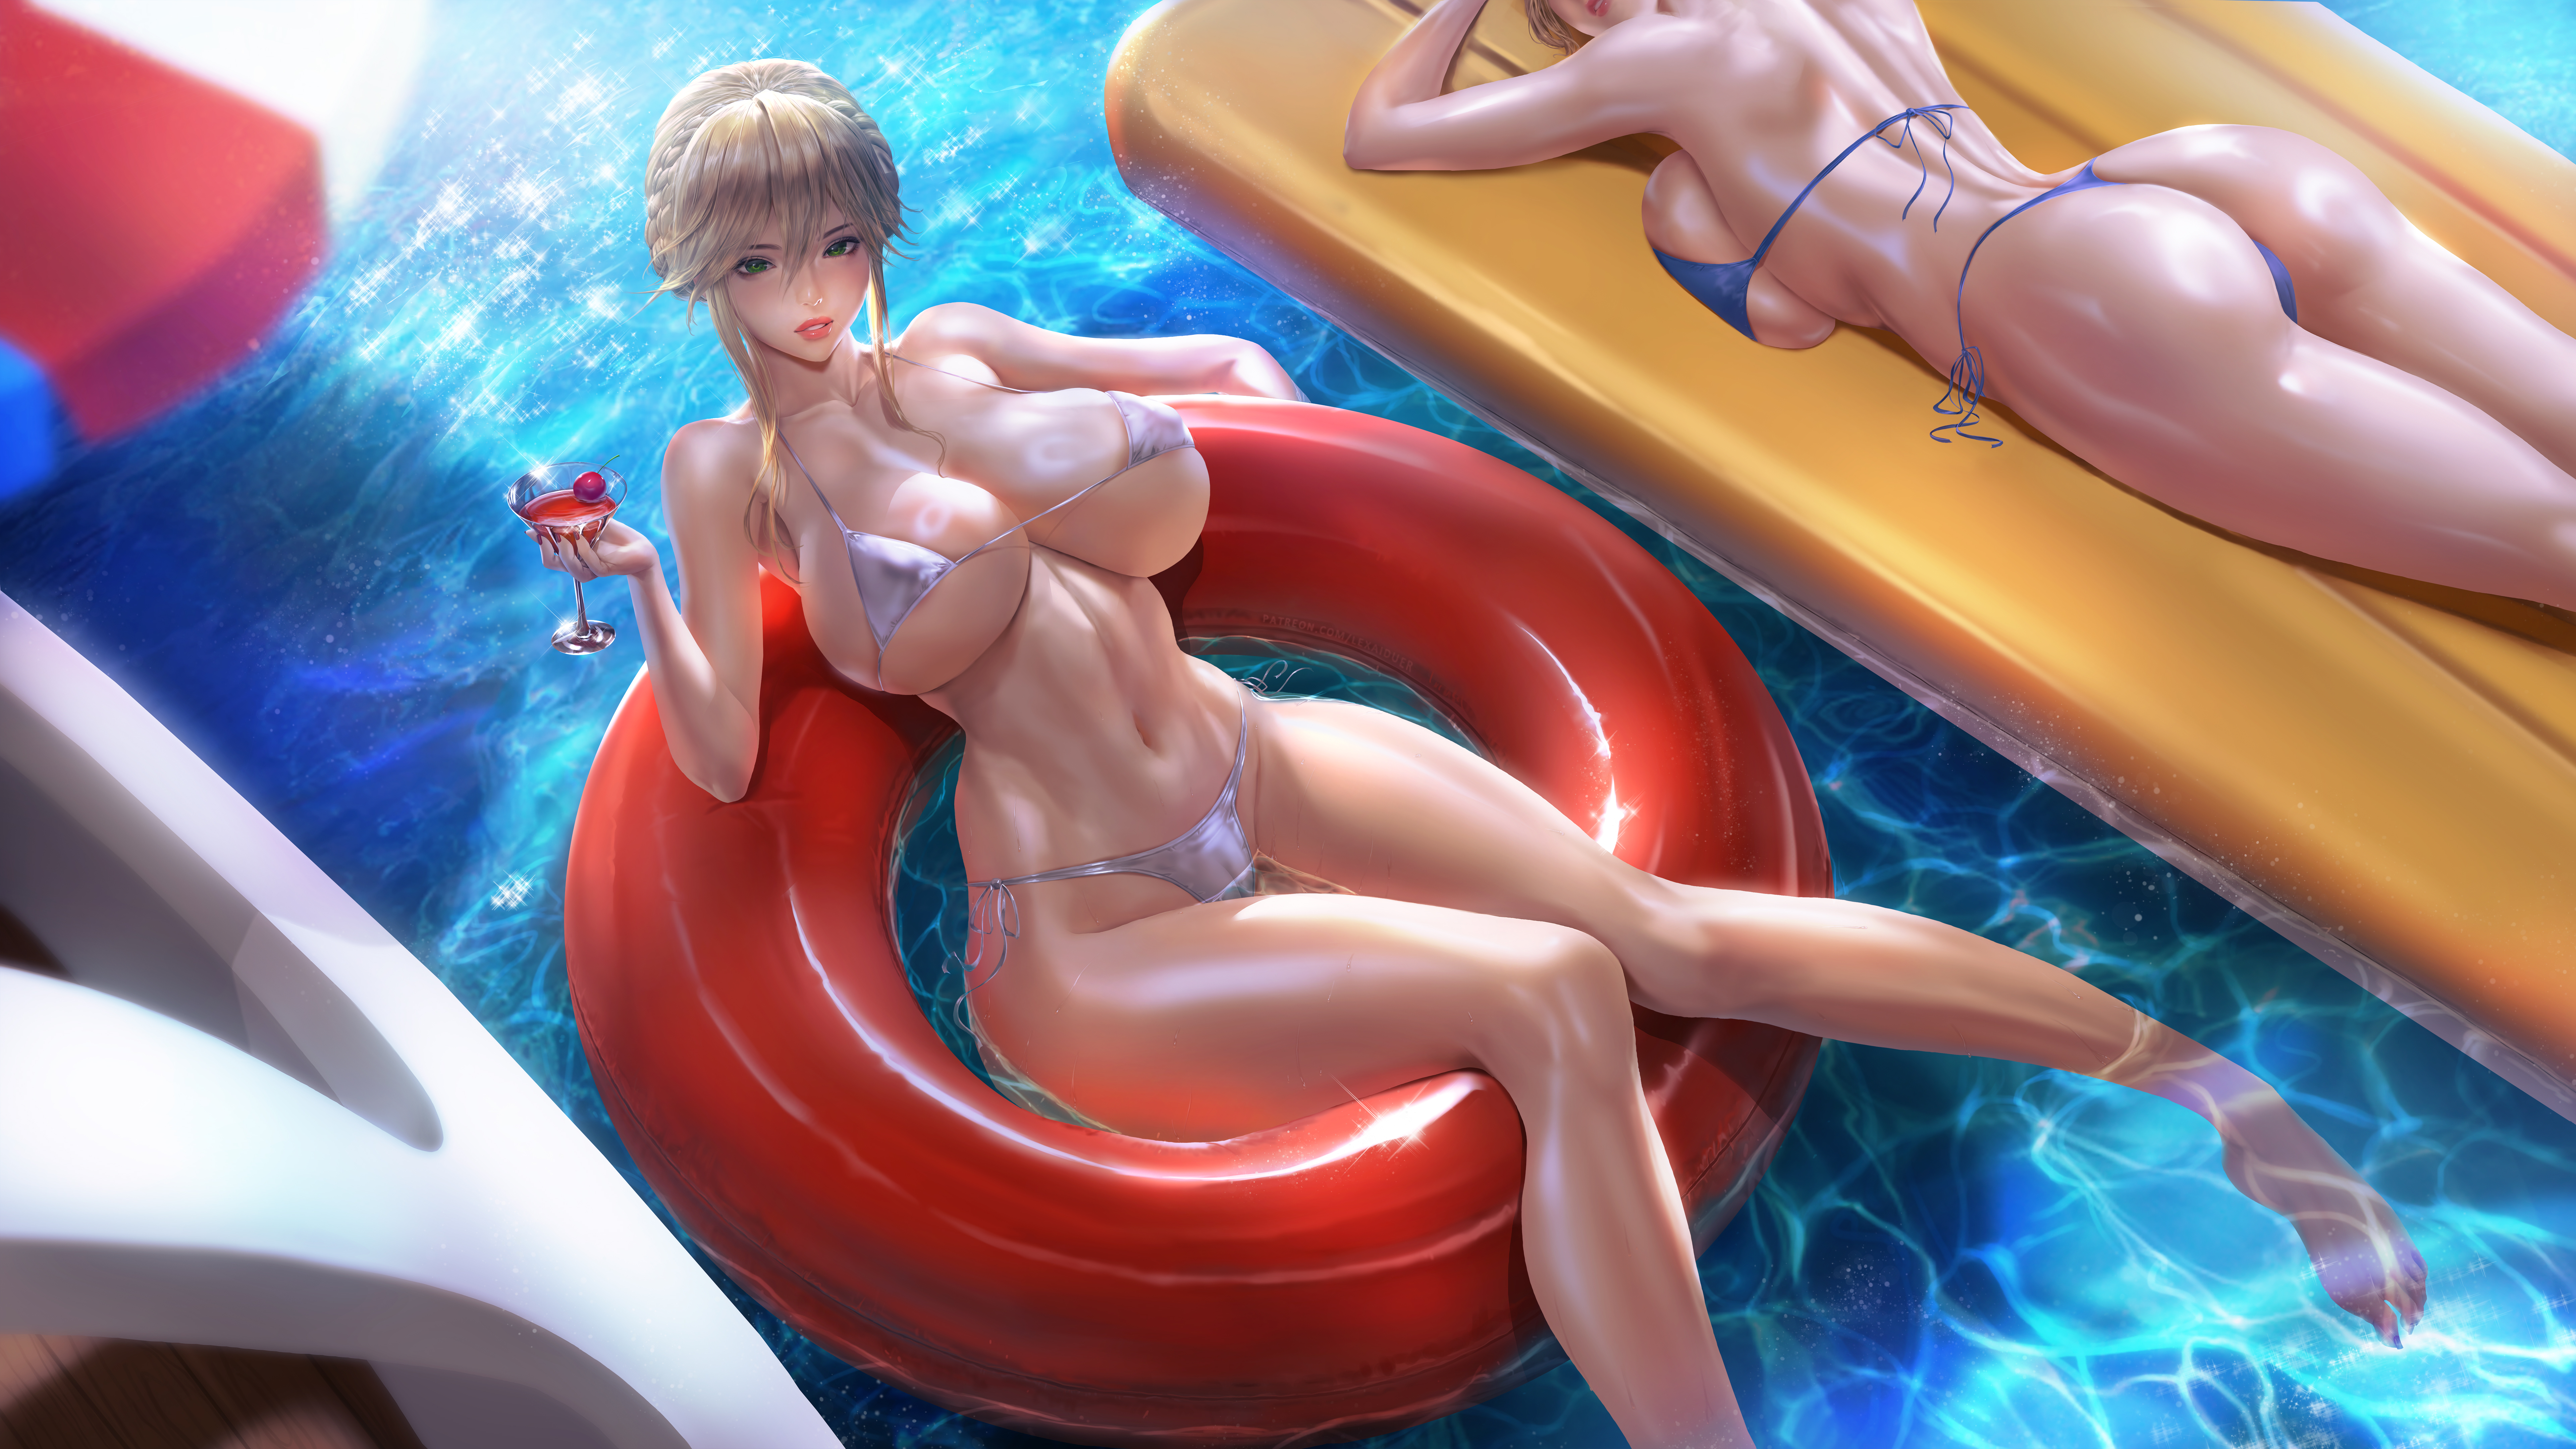 Anime 7680x4320 blonde bangs bikini belly looking at viewer green eyes parted lips floater summer barefoot high angle ass artwork drawing digital art illustration fan art Lexaiduer anime girls Jeanne d'Arc rear view Fate/Grand Order legs Artoria Pendragon anime Ruler (Fate/Grand Order) huge breasts curvy lying down lying on front swimwear knees together drinking glass two women women bursting breasts cocktails Fate series